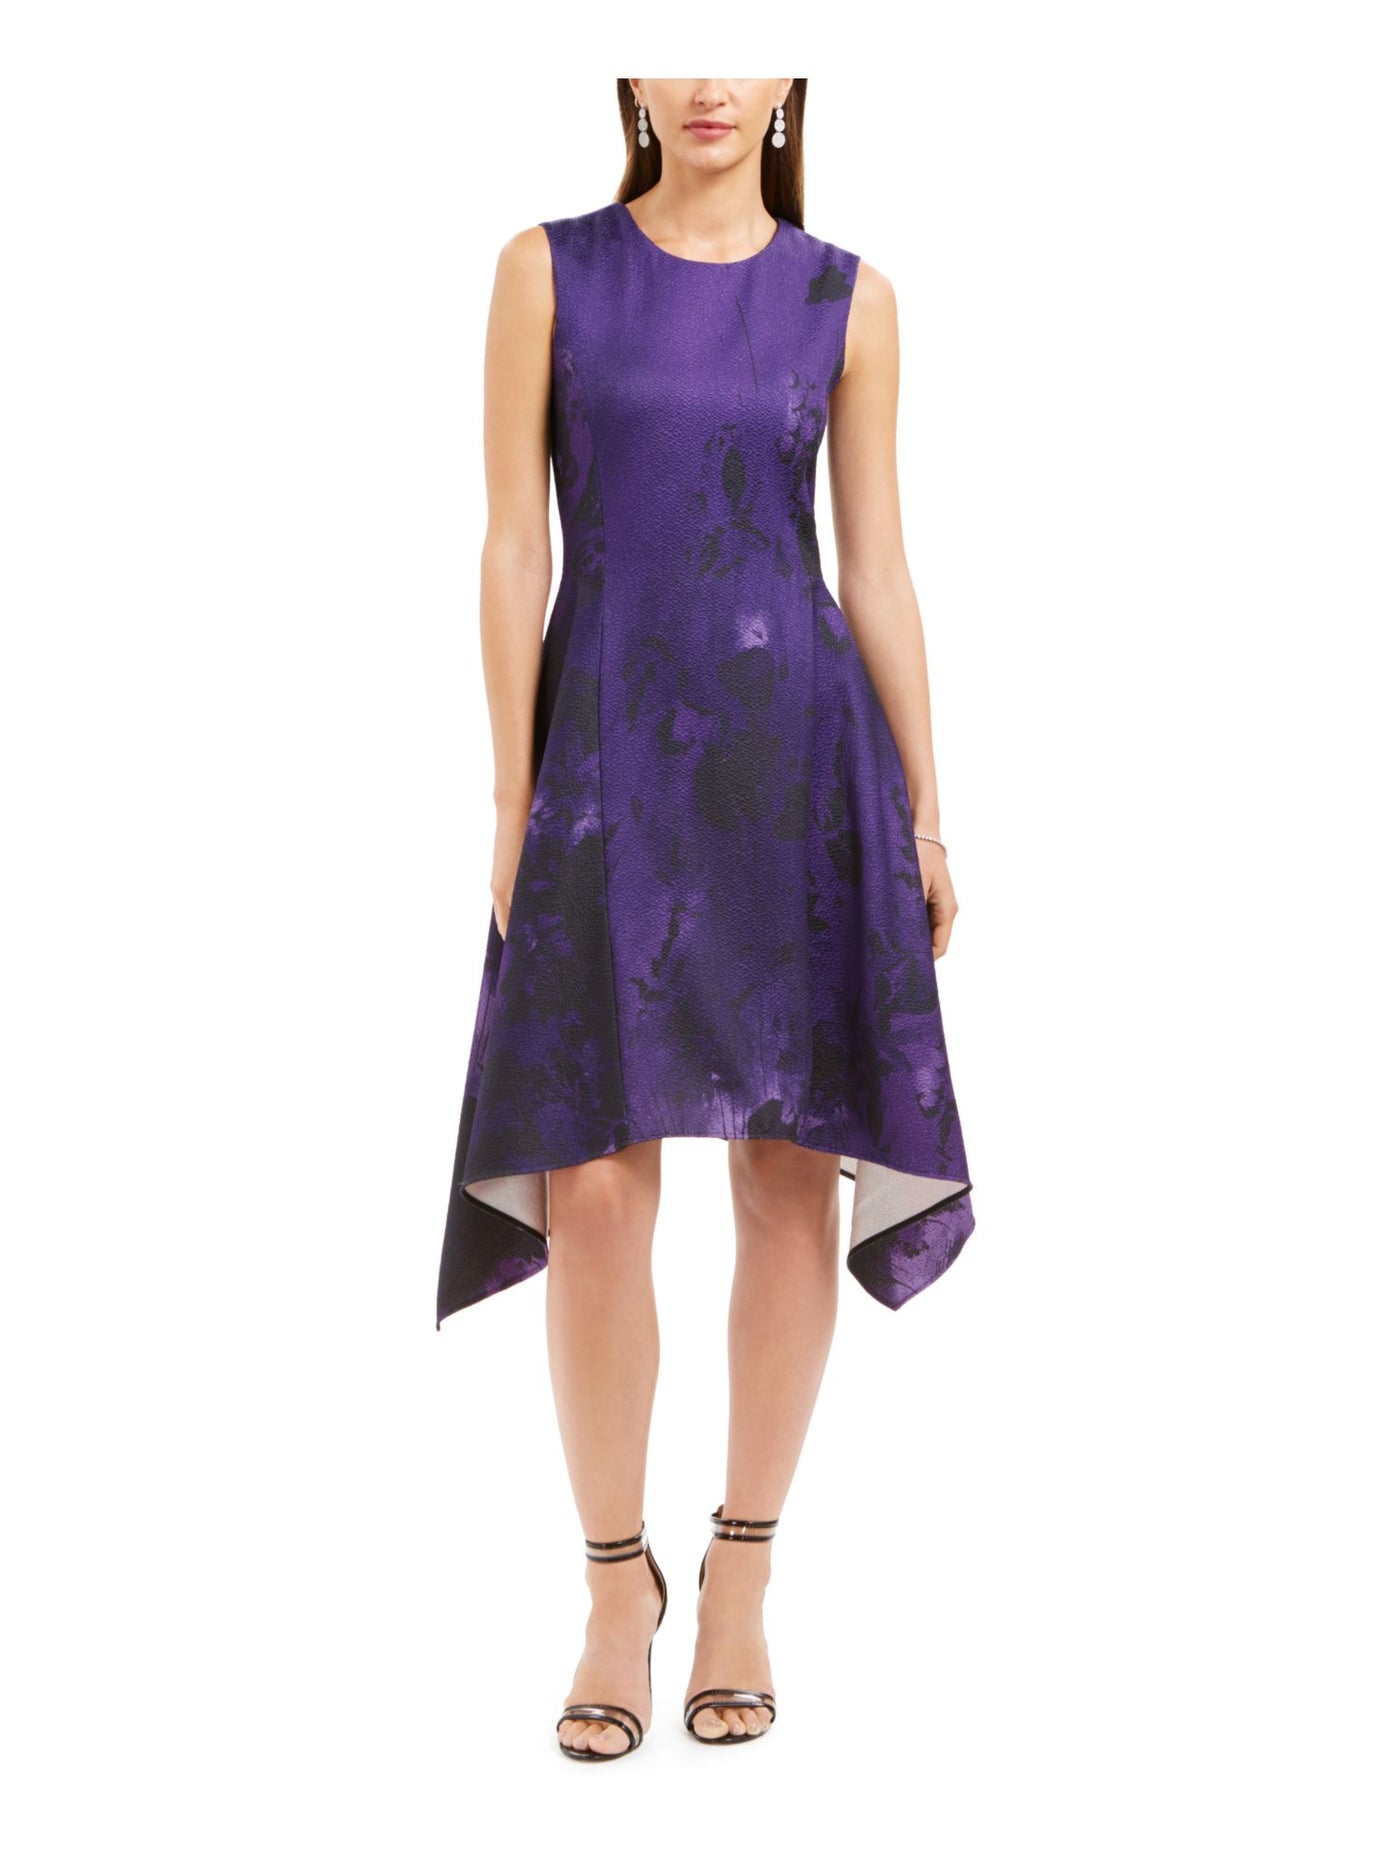 NATORI Womens Zippered Sleeveless Jewel Neck Above The Knee Party Fit + Flare Dress